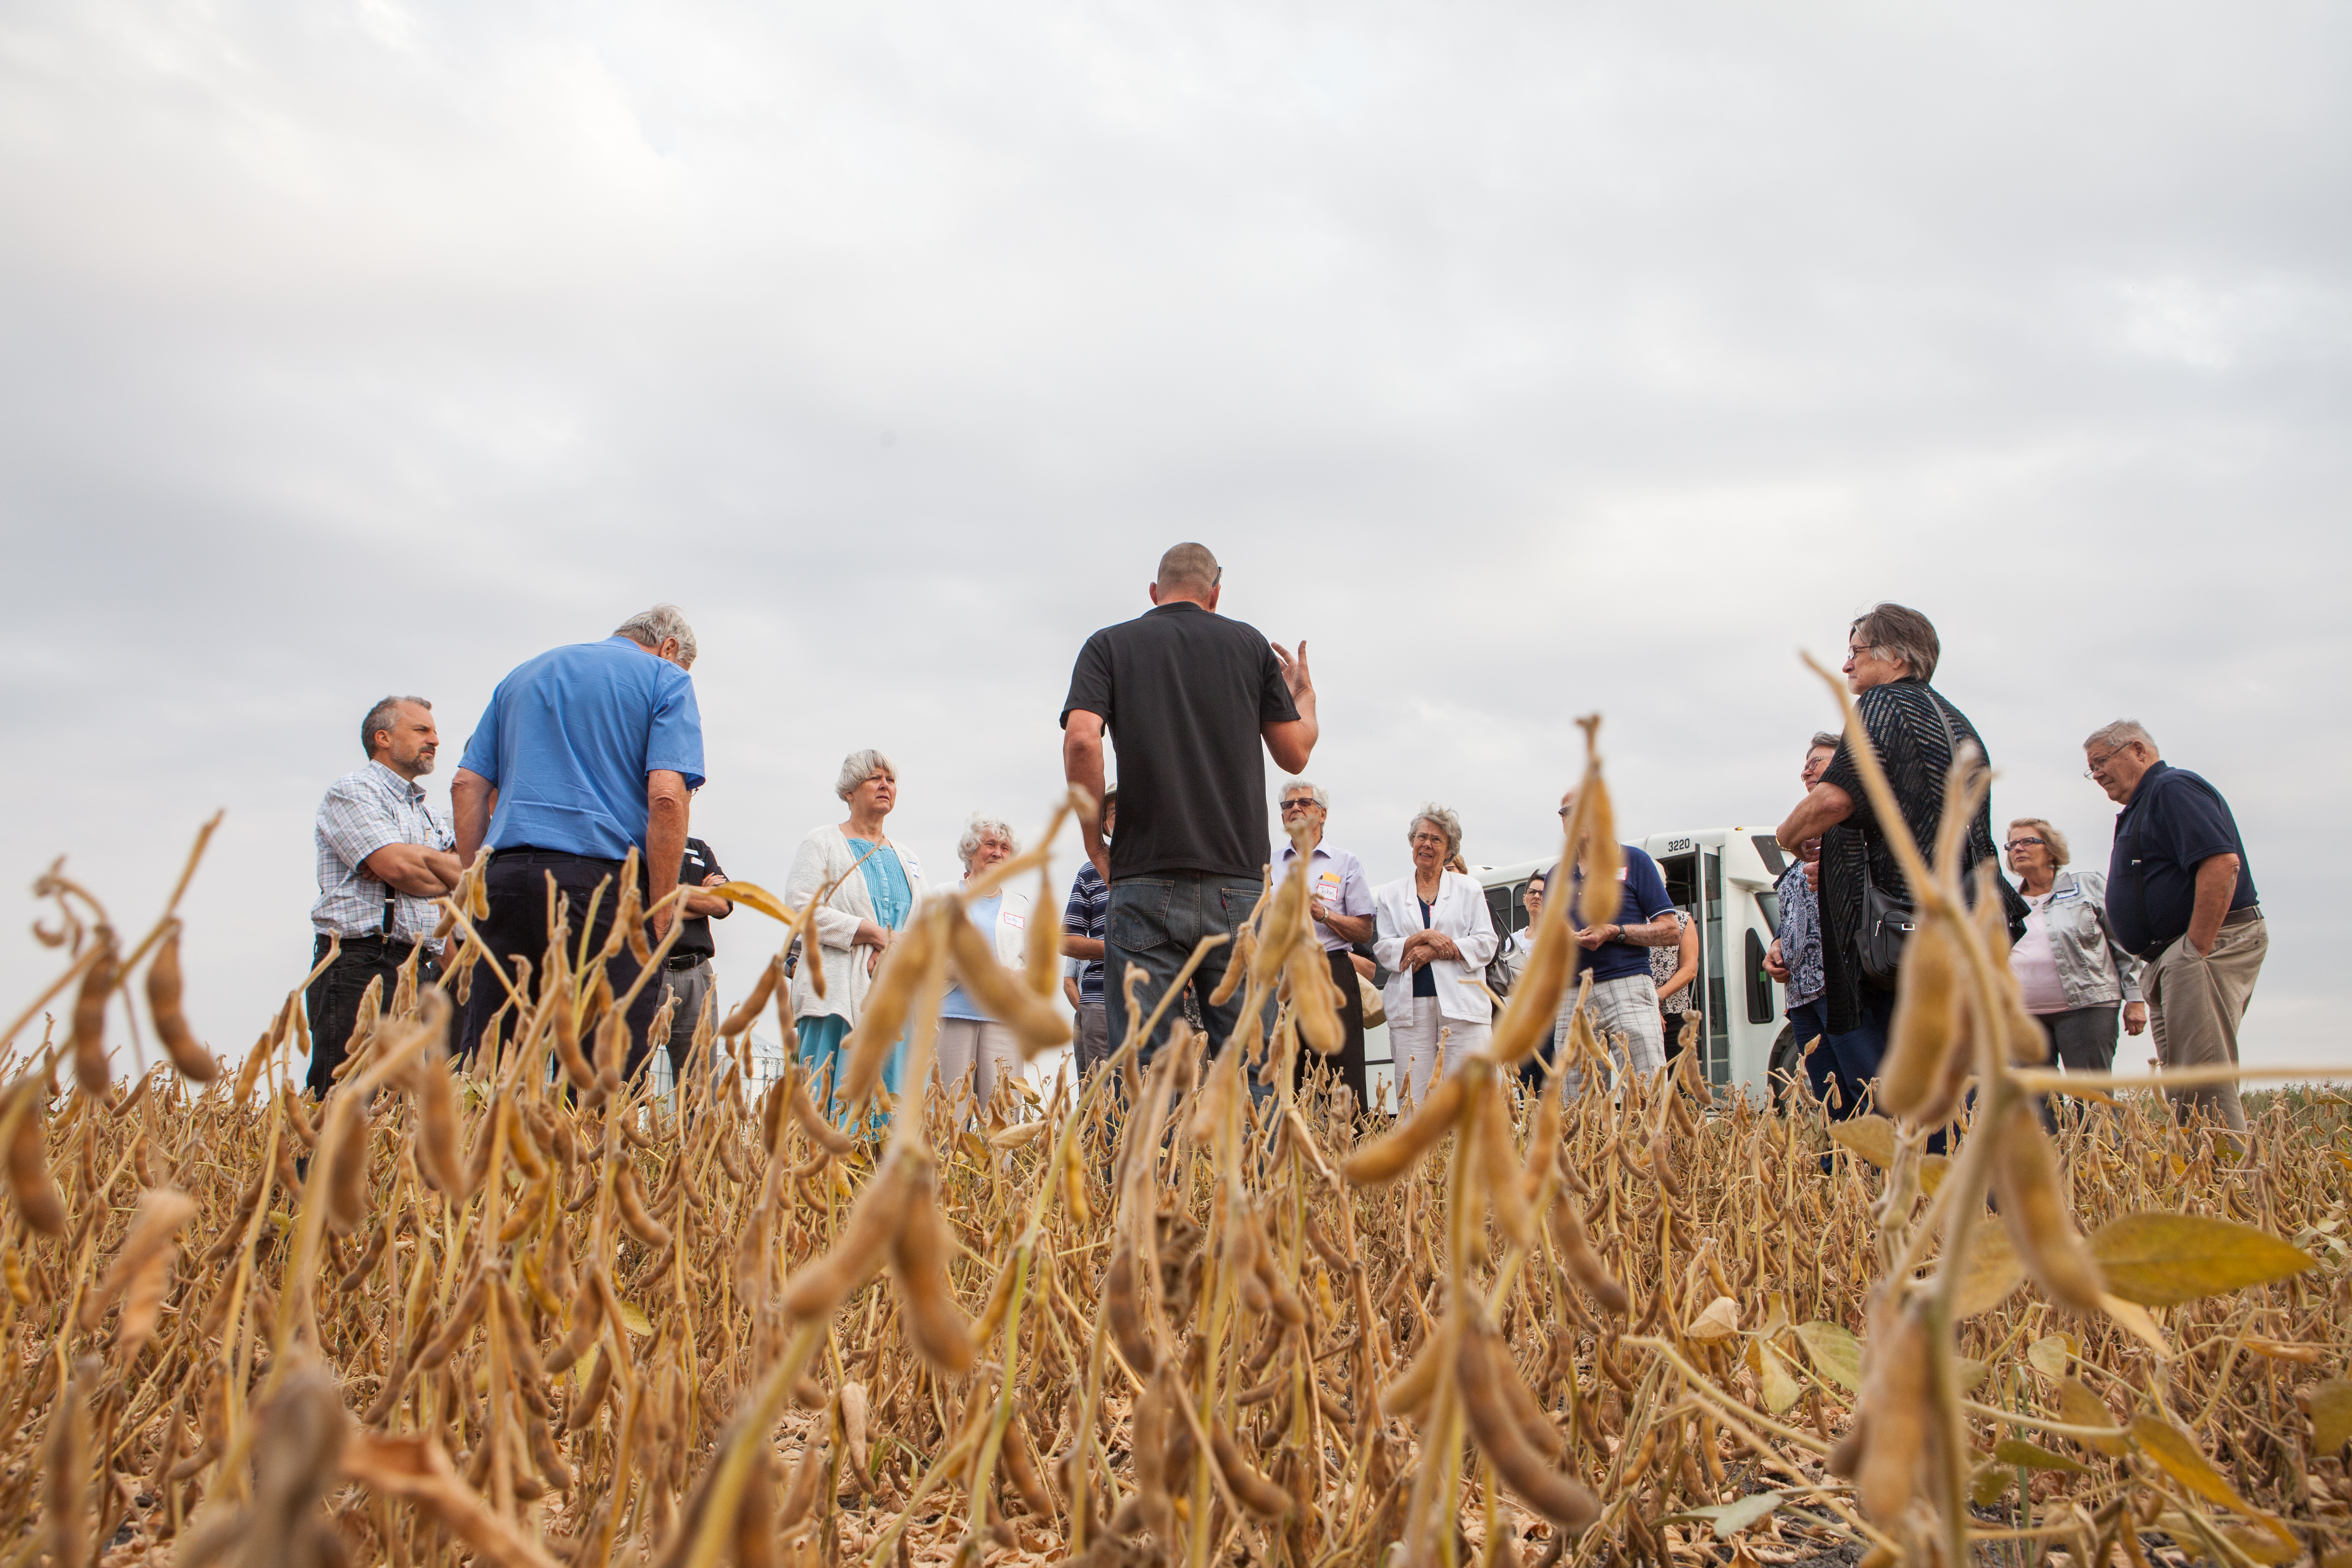 Grow Hope farmer Grant Dyck (black golf shirt) discusses a soybean crop with guests at the harvest celebration held at Crystal Spring Hutterite Colony.